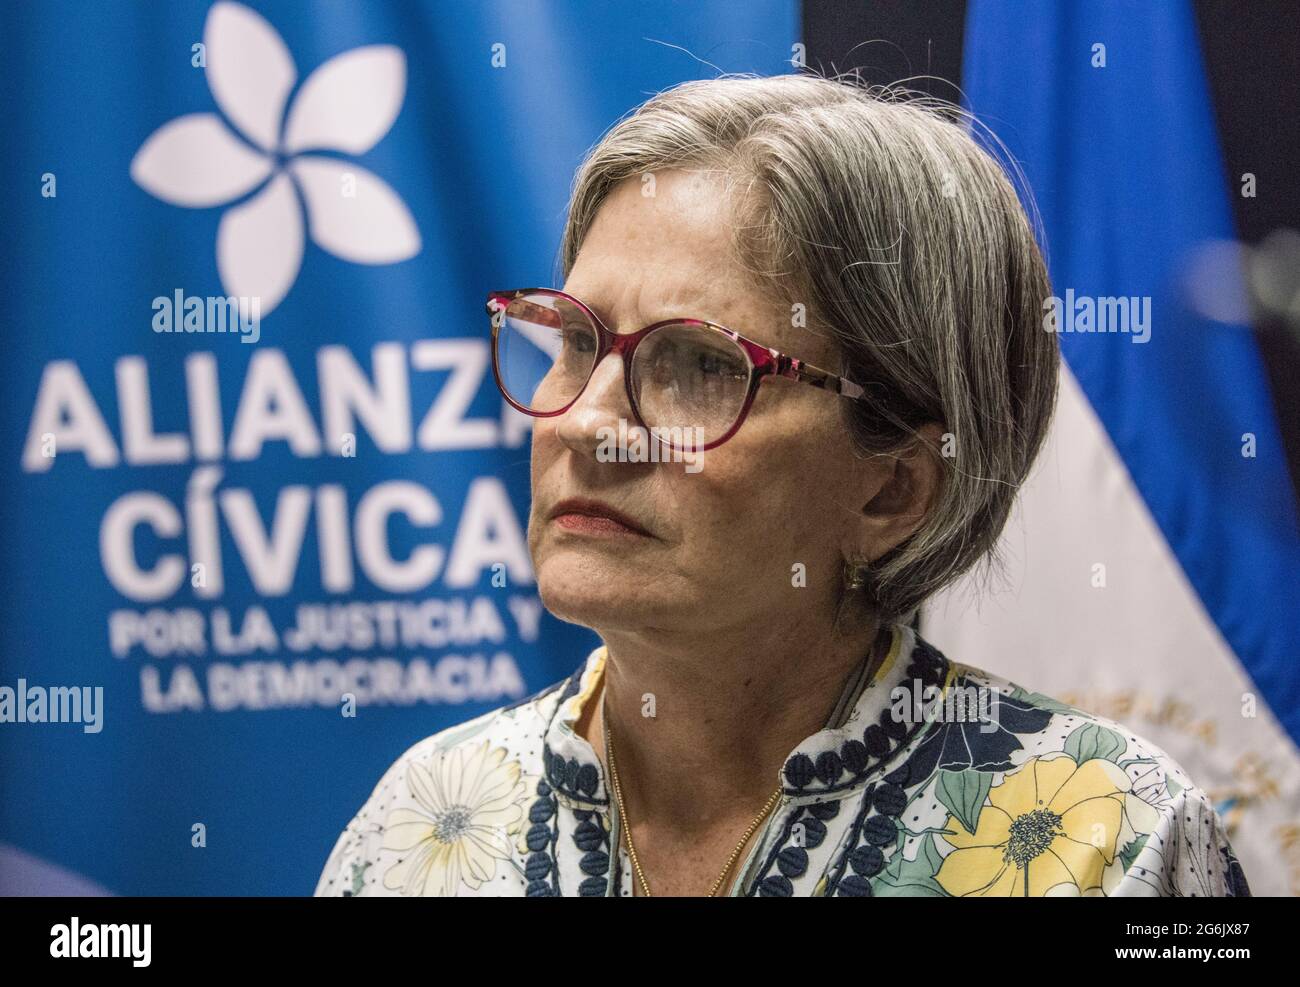 Caracas, Nicaragua. 06th July, 2021. Kitty Monterrey, leader of the 'Ciudadanos por la Libertad' (Citizens for Freedom, CXL) party, attends a press conference following further arrests of opposition figures. Credit: Str/dpa/Alamy Live News Stock Photo